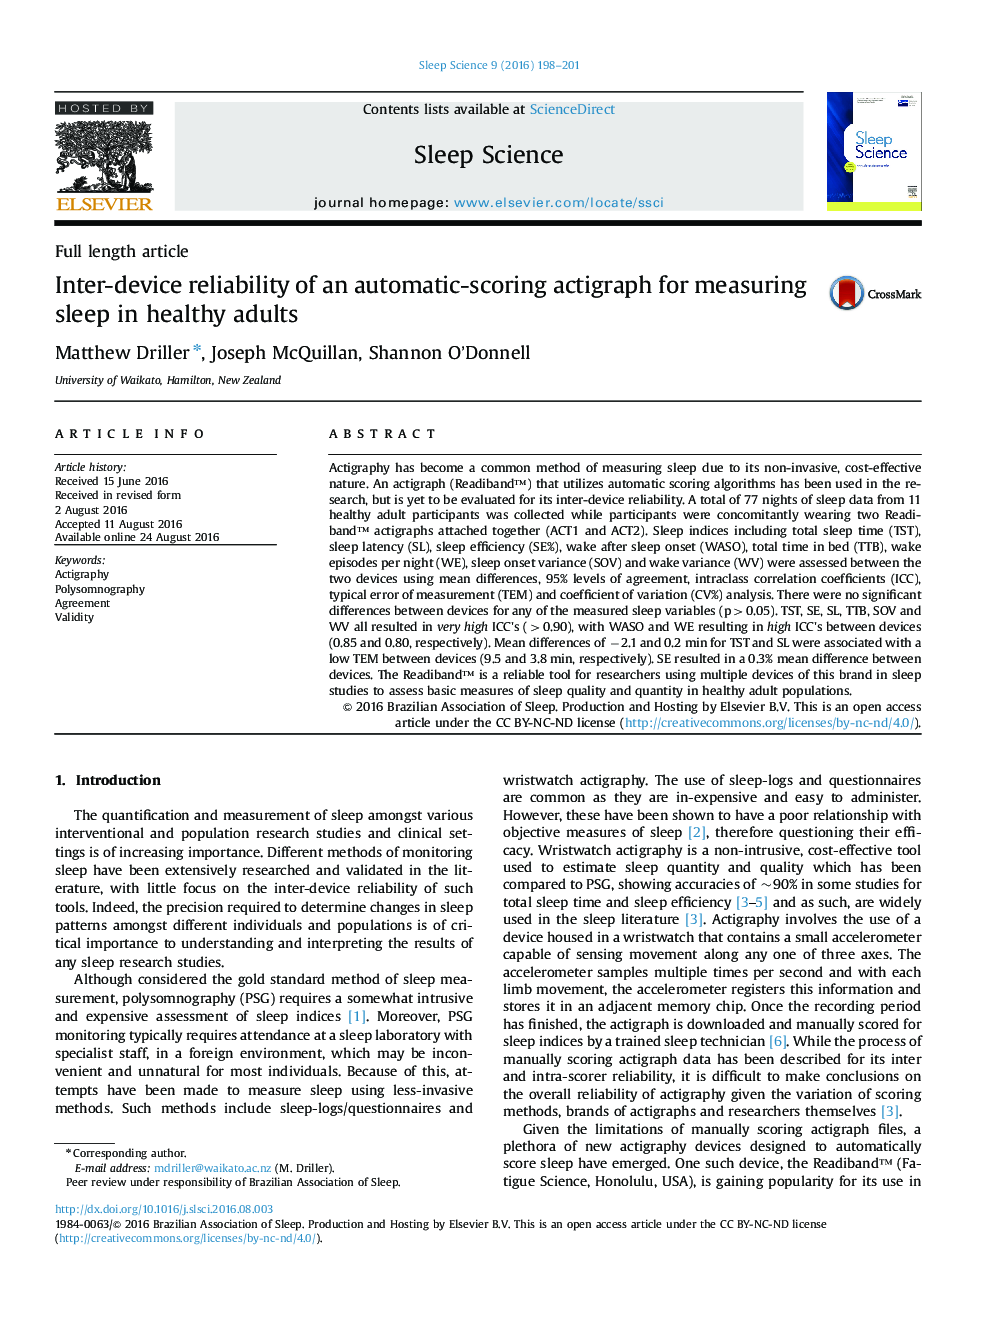 Full length articleInter-device reliability of an automatic-scoring actigraph for measuring sleep in healthy adults